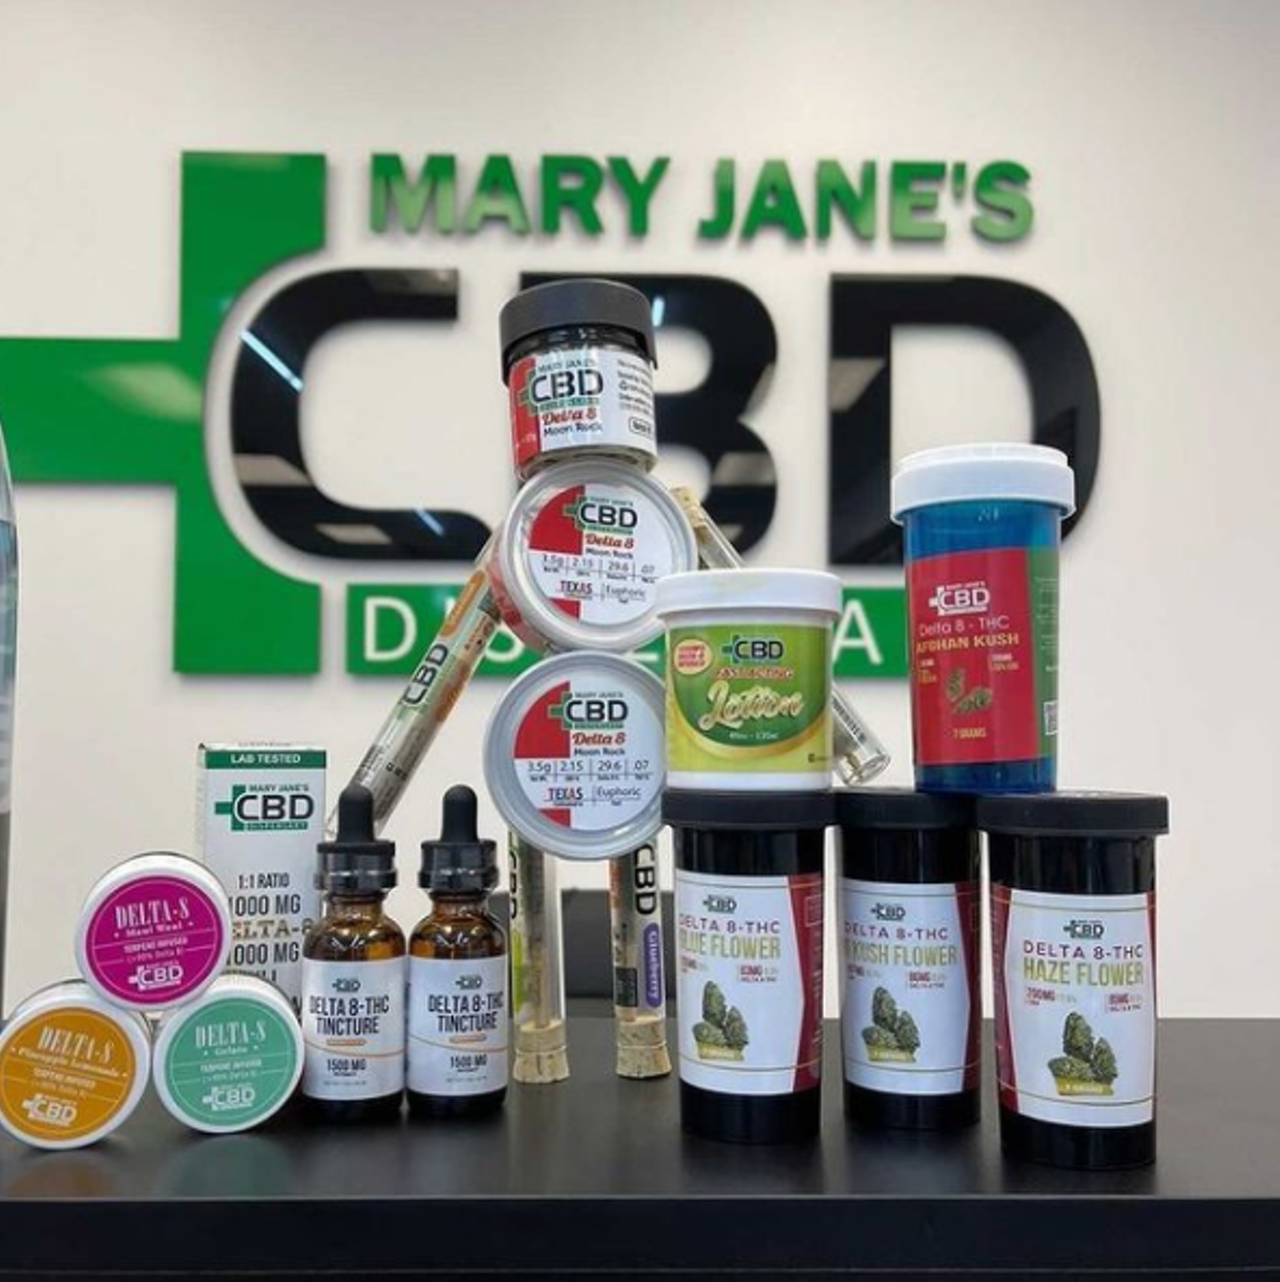 Mary Jane’s CBD Dispensary
Multiple locations, mjcbdd.com
With six shops across San Antonio, you’ve got access to high-quality tobacco, delta-8 THC and CBD oil products at your fingertips no matter where you are.
Photo via Instagram / maryjanes_family